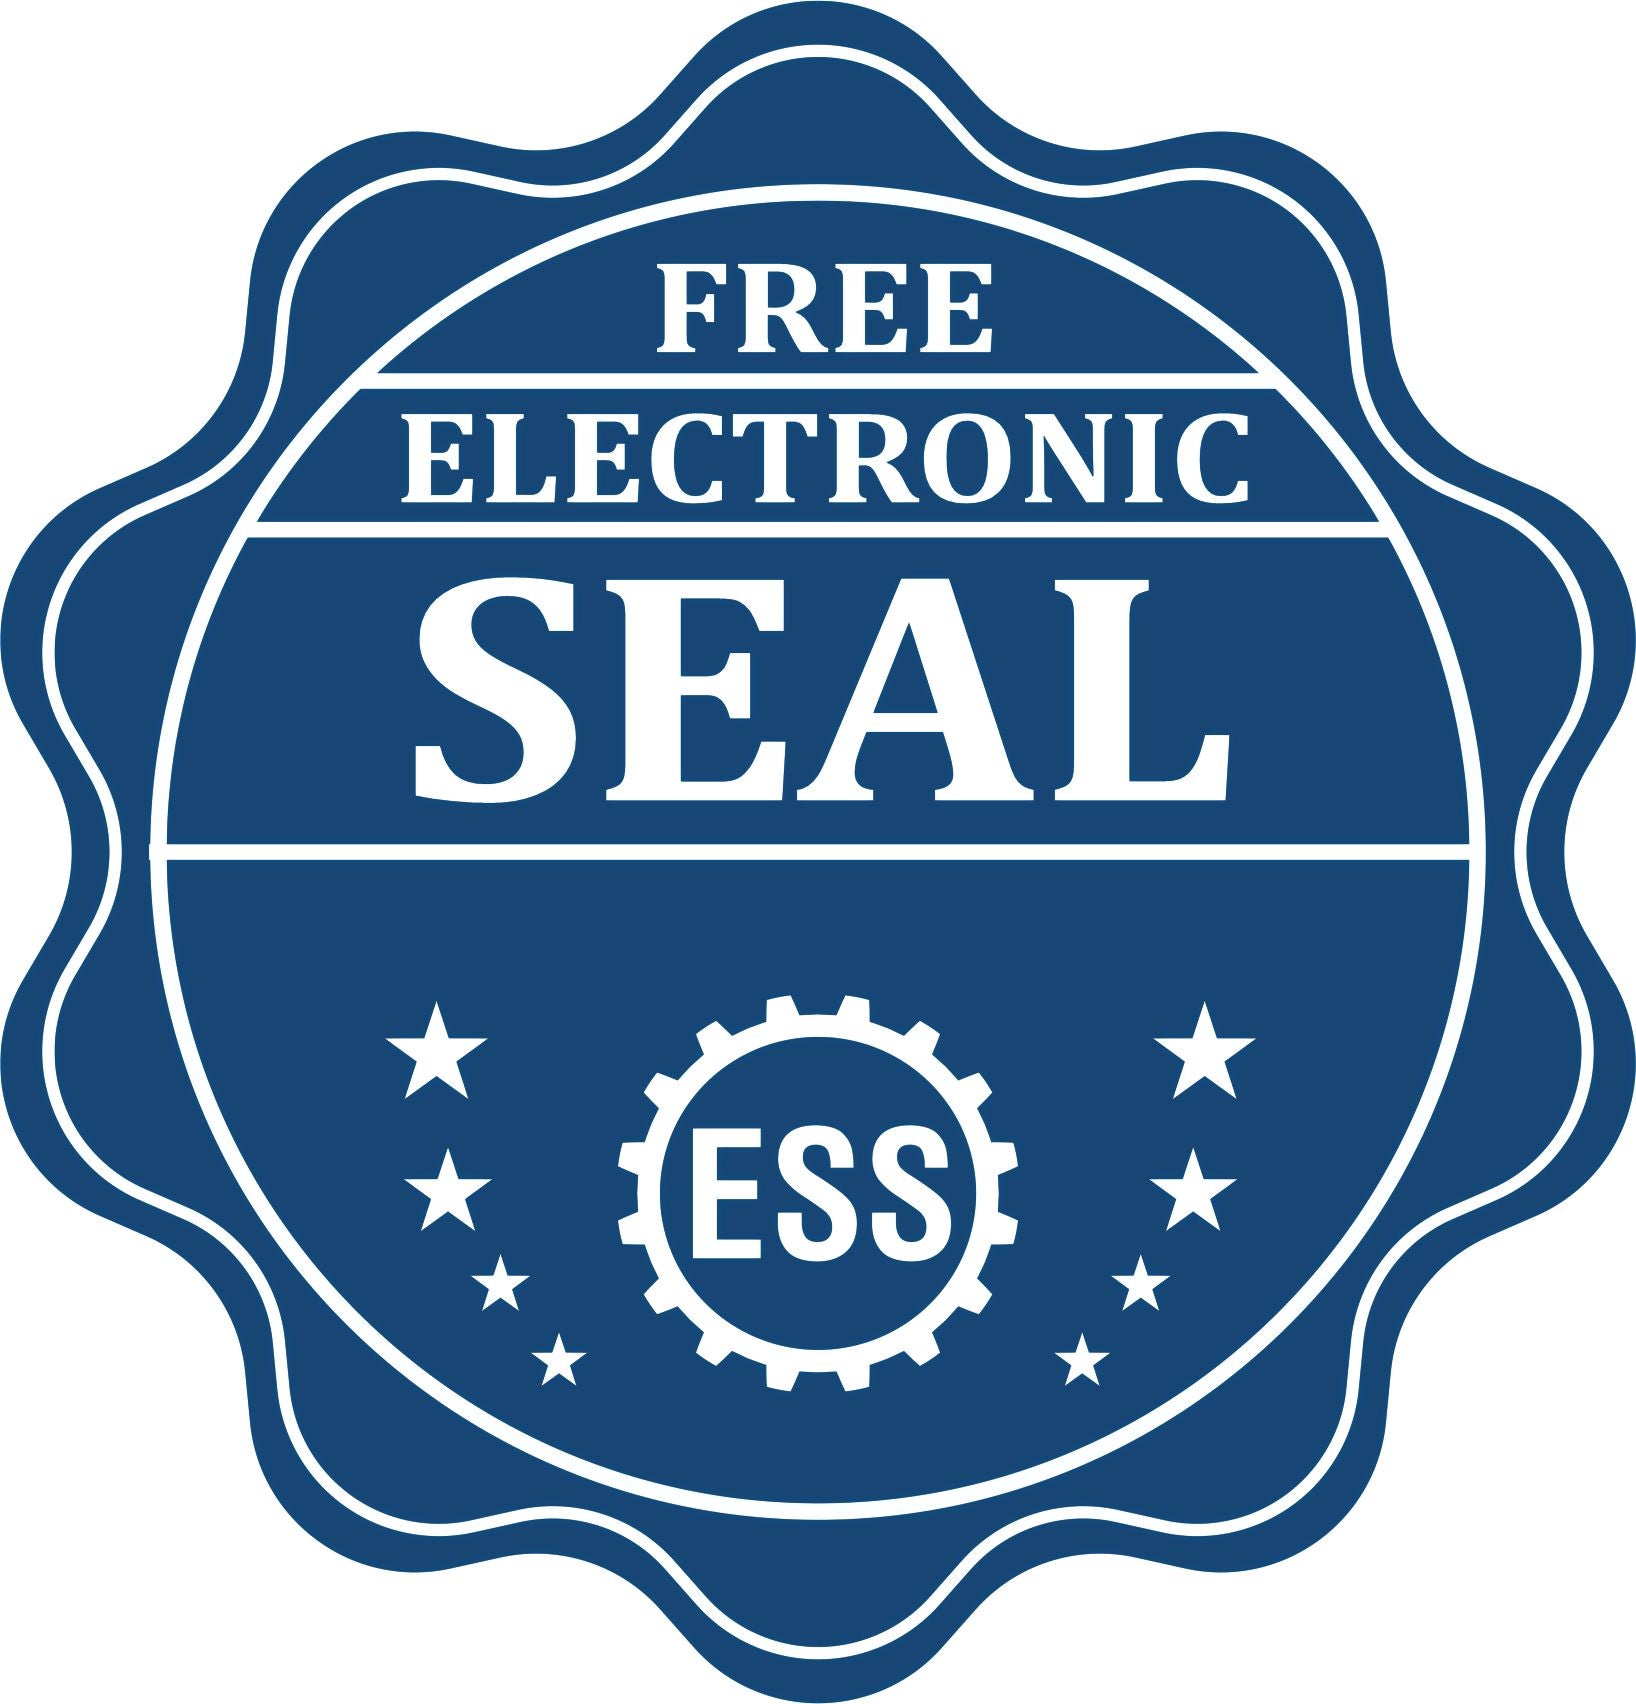 A badge showing a free electronic seal for the Heavy-Duty New Mexico Rectangular Notary Stamp with stars and the ESS gear on the emblem.